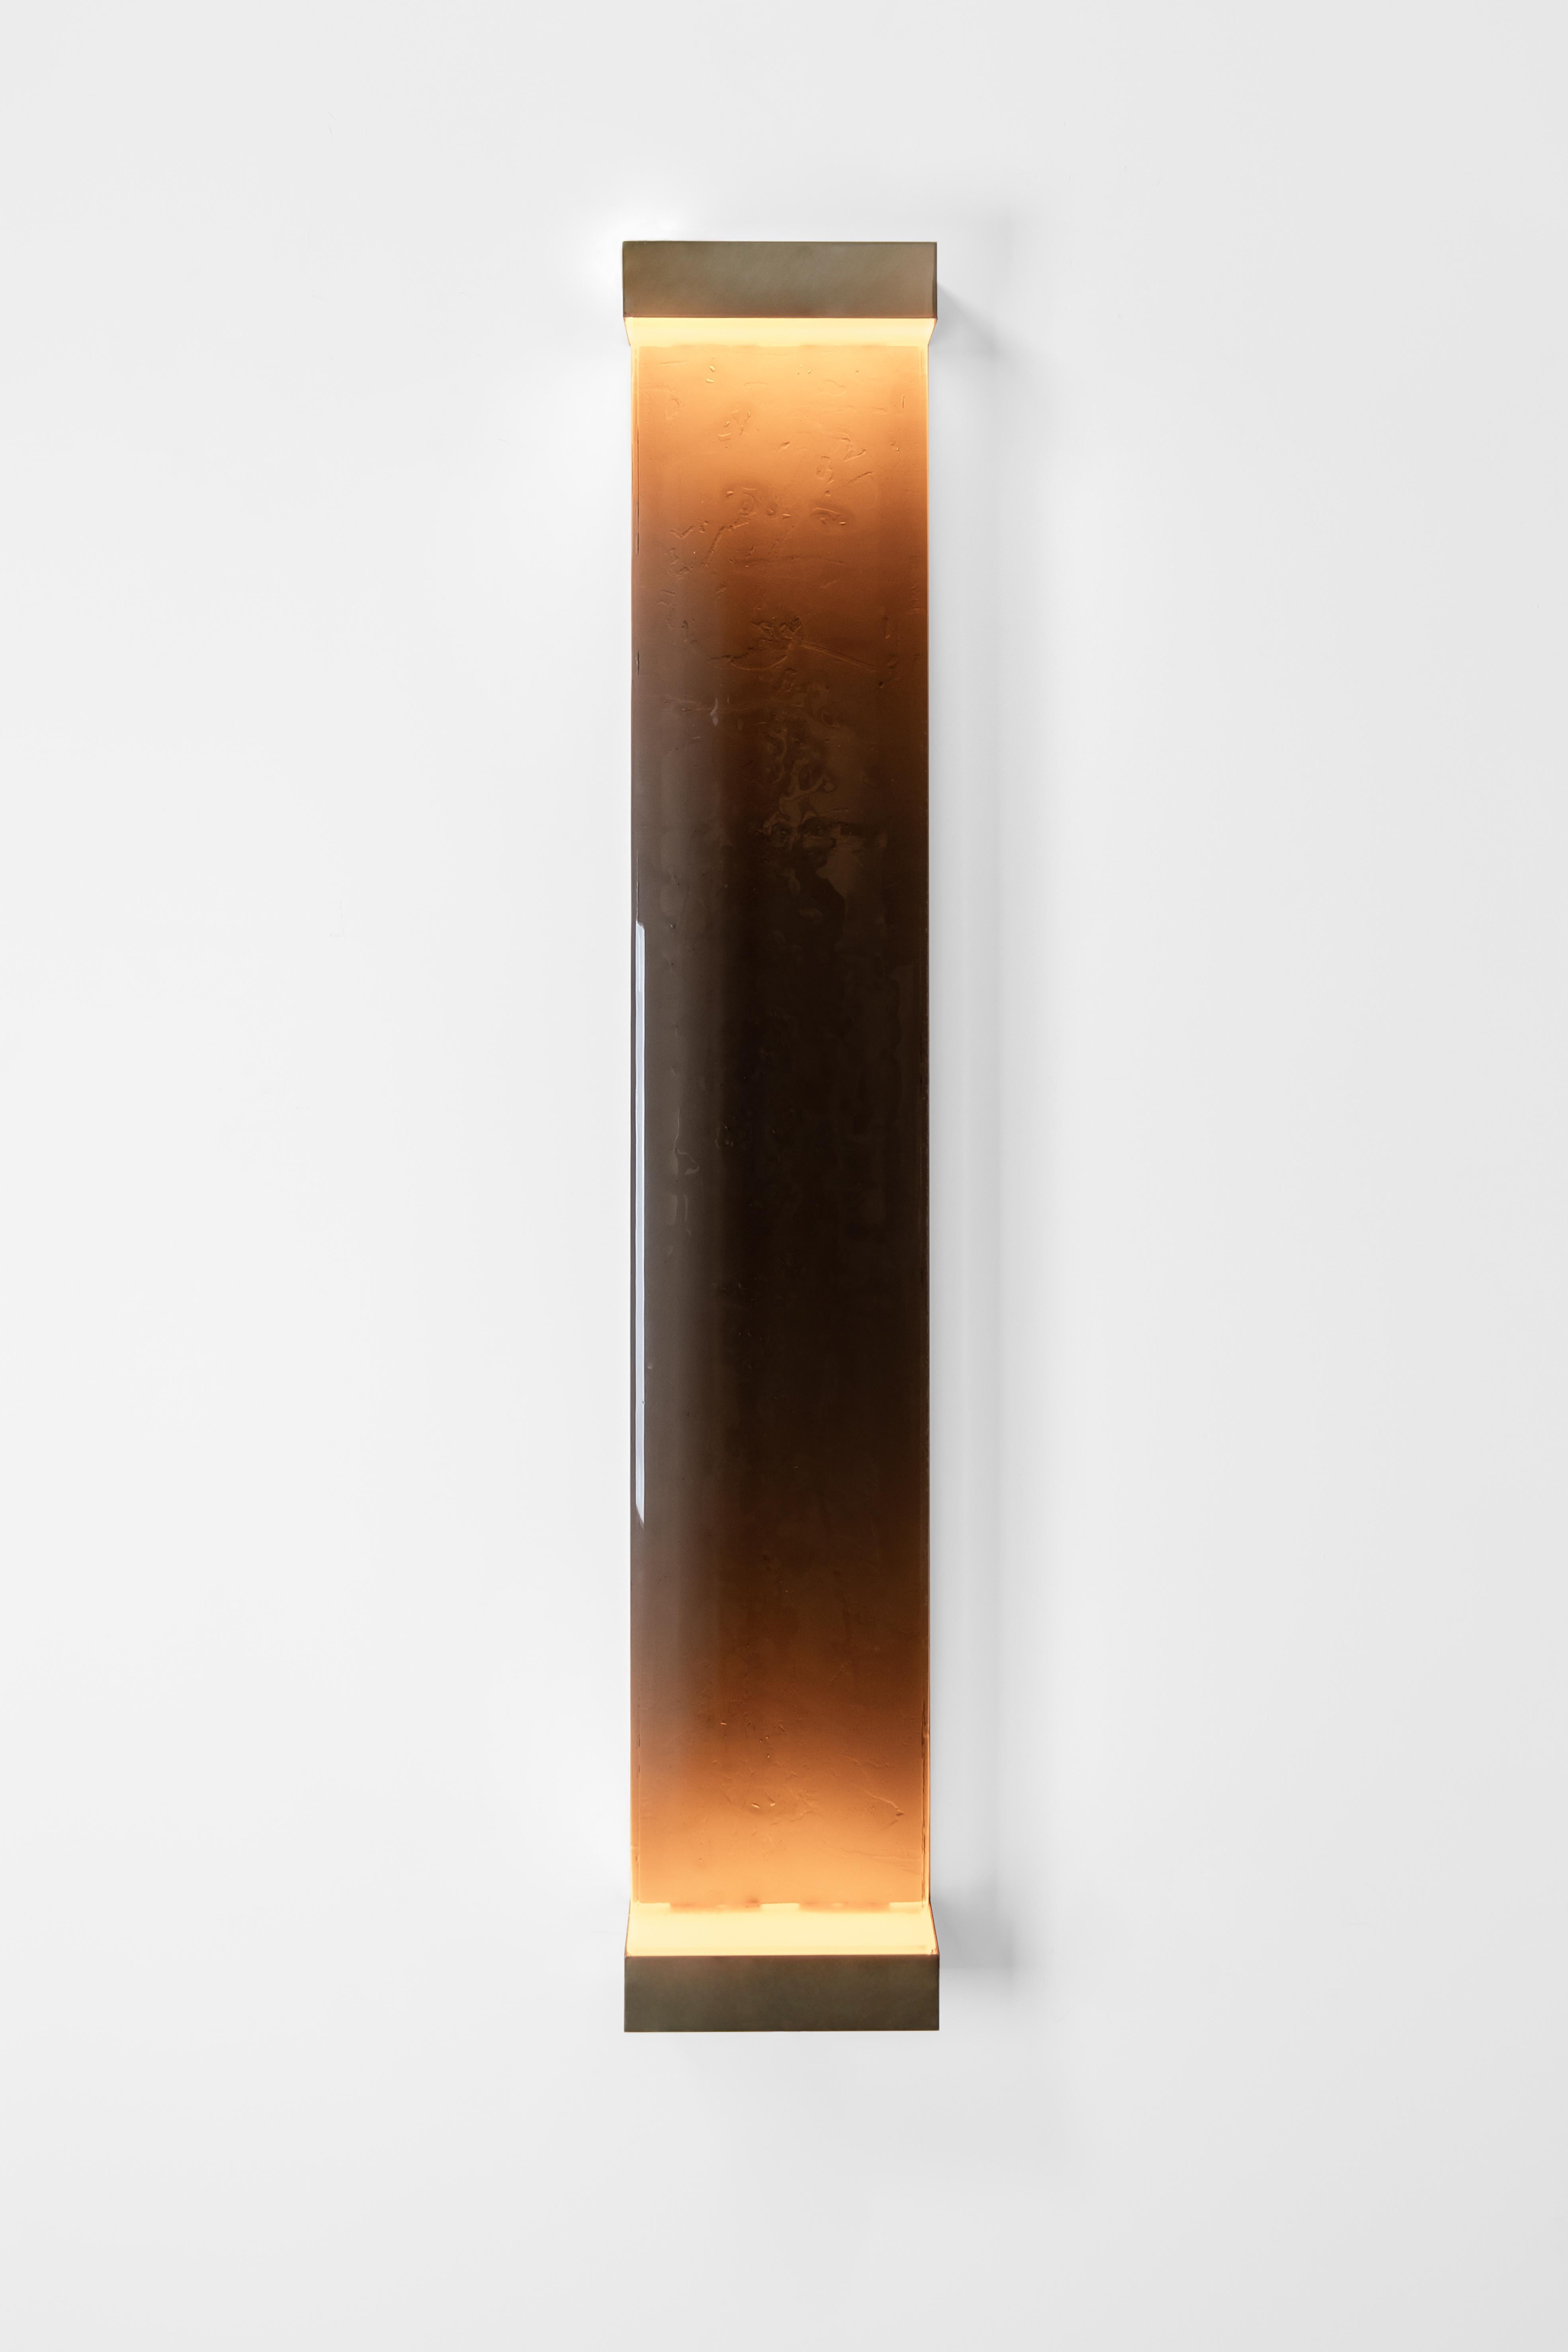 Jud wall lamp by Draga & Aurel.
Dimensions: W 23, D 10, H 131.
Materials: resin and brass.

All our lamps can be wired according to each country. If sold to the USA it will be wired for the USA for instance.

Inspired by minimalism, the Jud